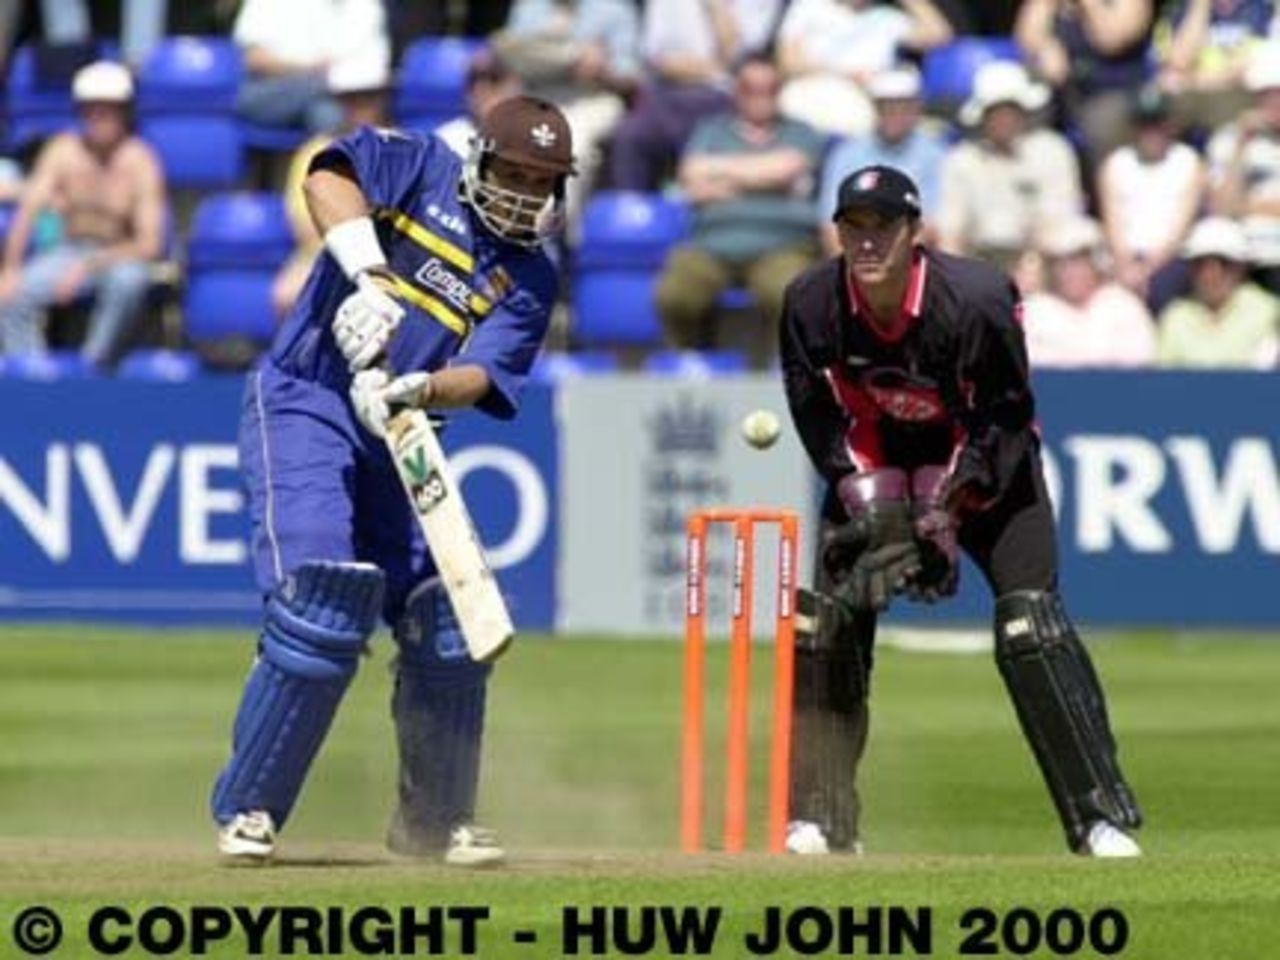 Mark Butcher hits a boundary watched by Adrian Shaw, National League 30 Apr 2000